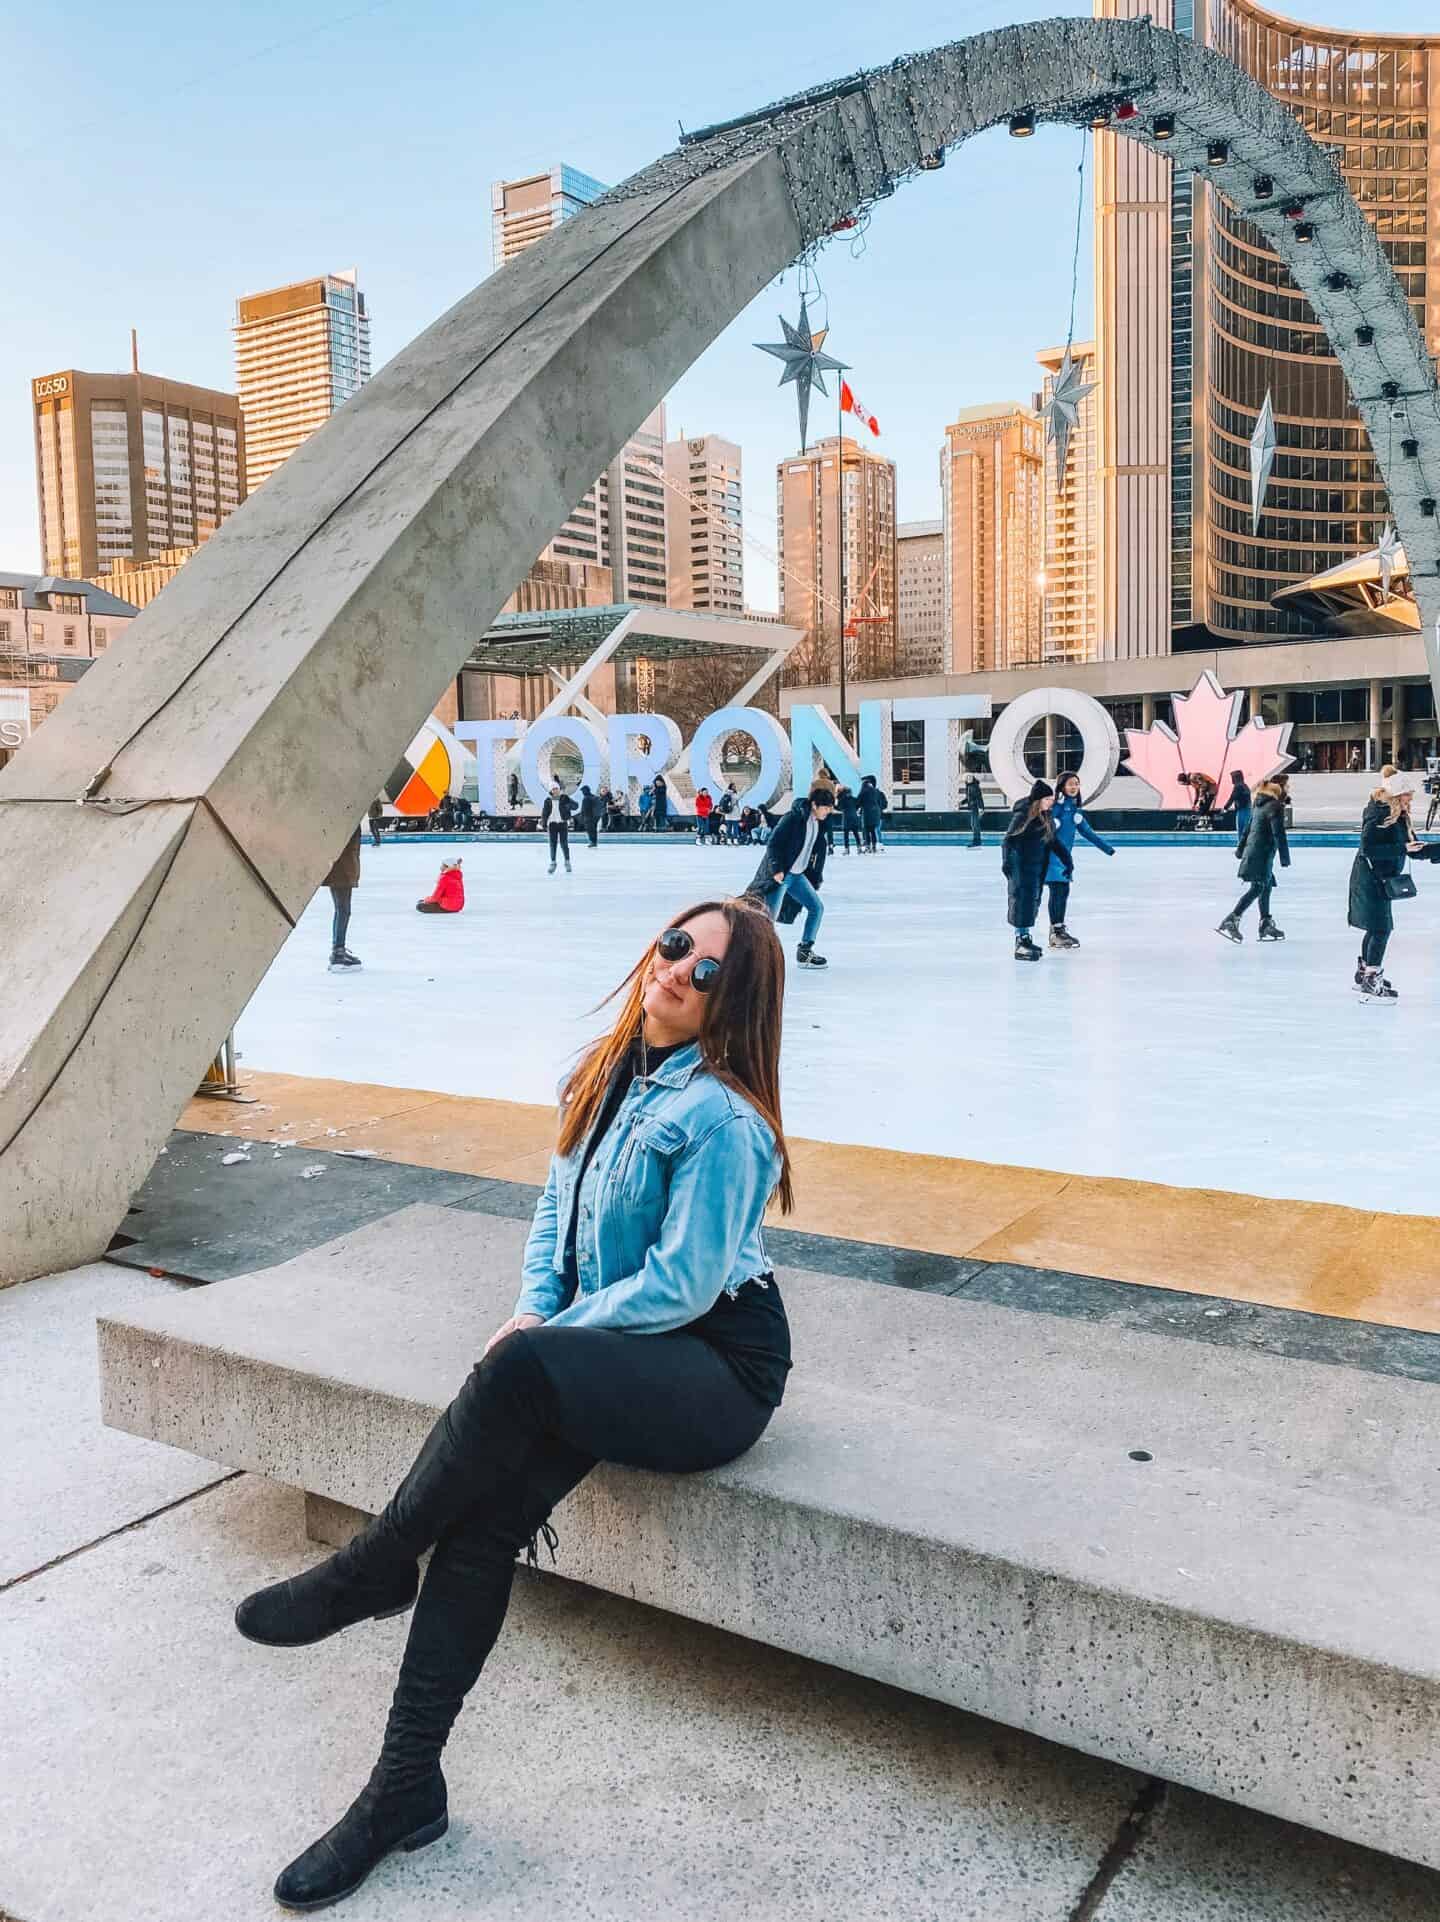 Your 4 day Toronto itinerary needs to include a stop at Nathan Phillips Square